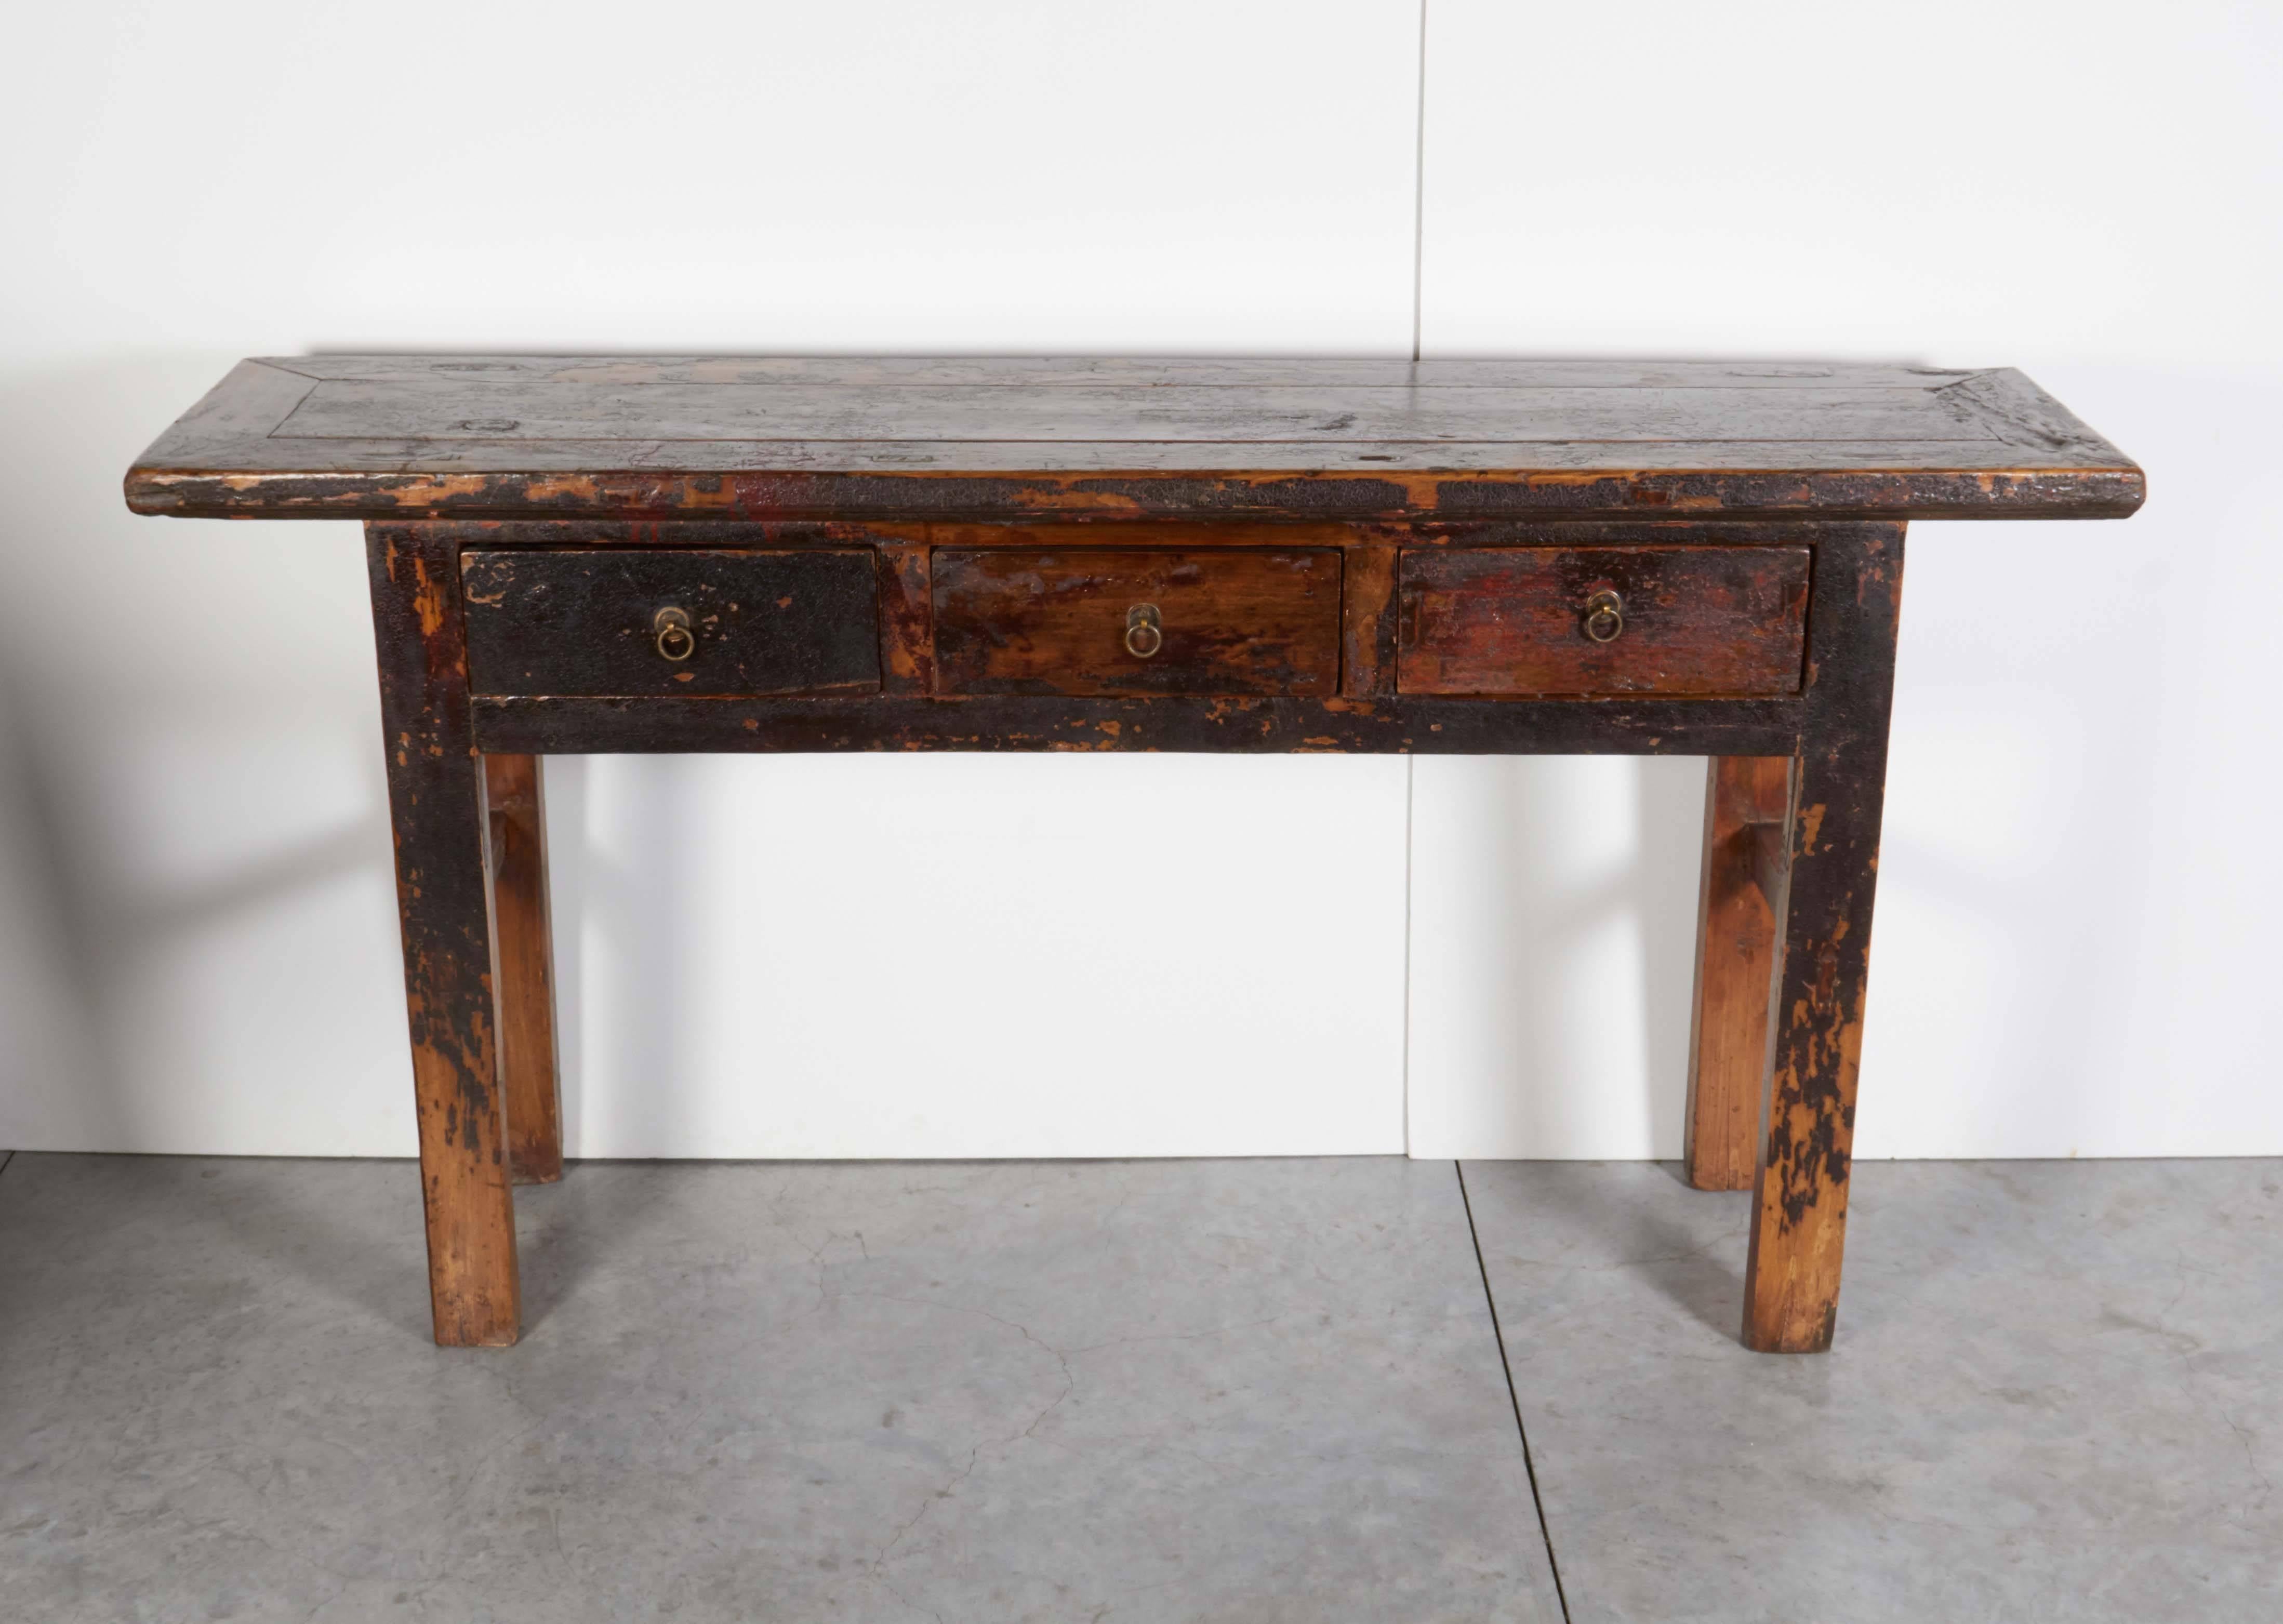 Chinese Beautifully Worn Three-Drawer Console with Traces of Old Lacquer